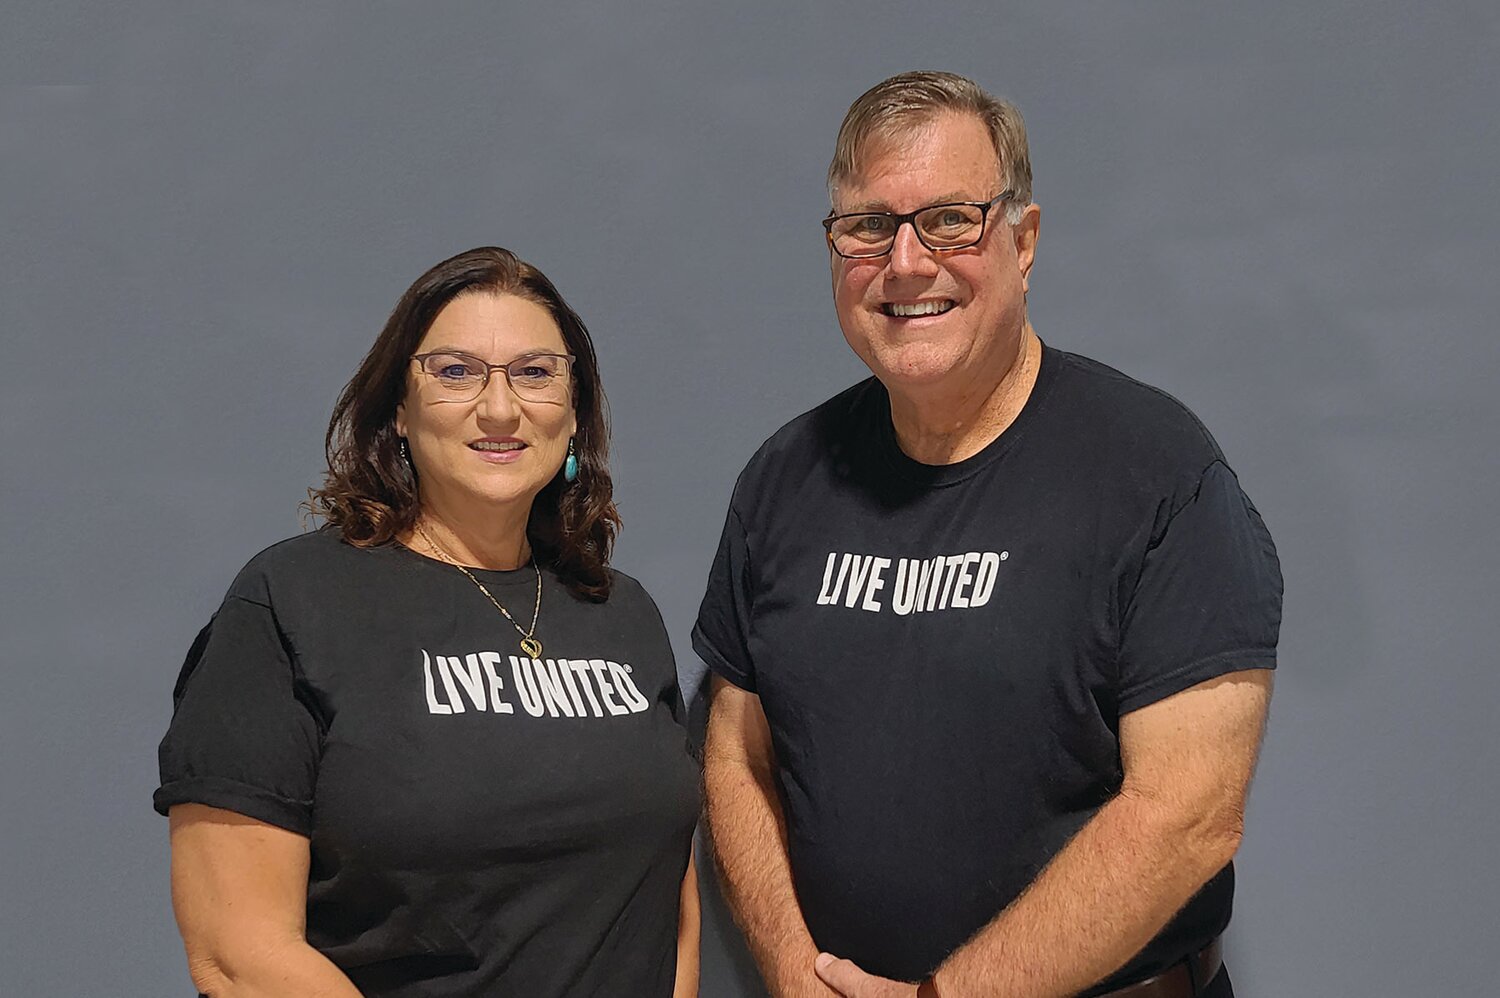 Dr. Barbara Mundy and Bob Beville will be kicking off this year’s United Way campaign at the LaBelle Civic Center on Nov. 16.